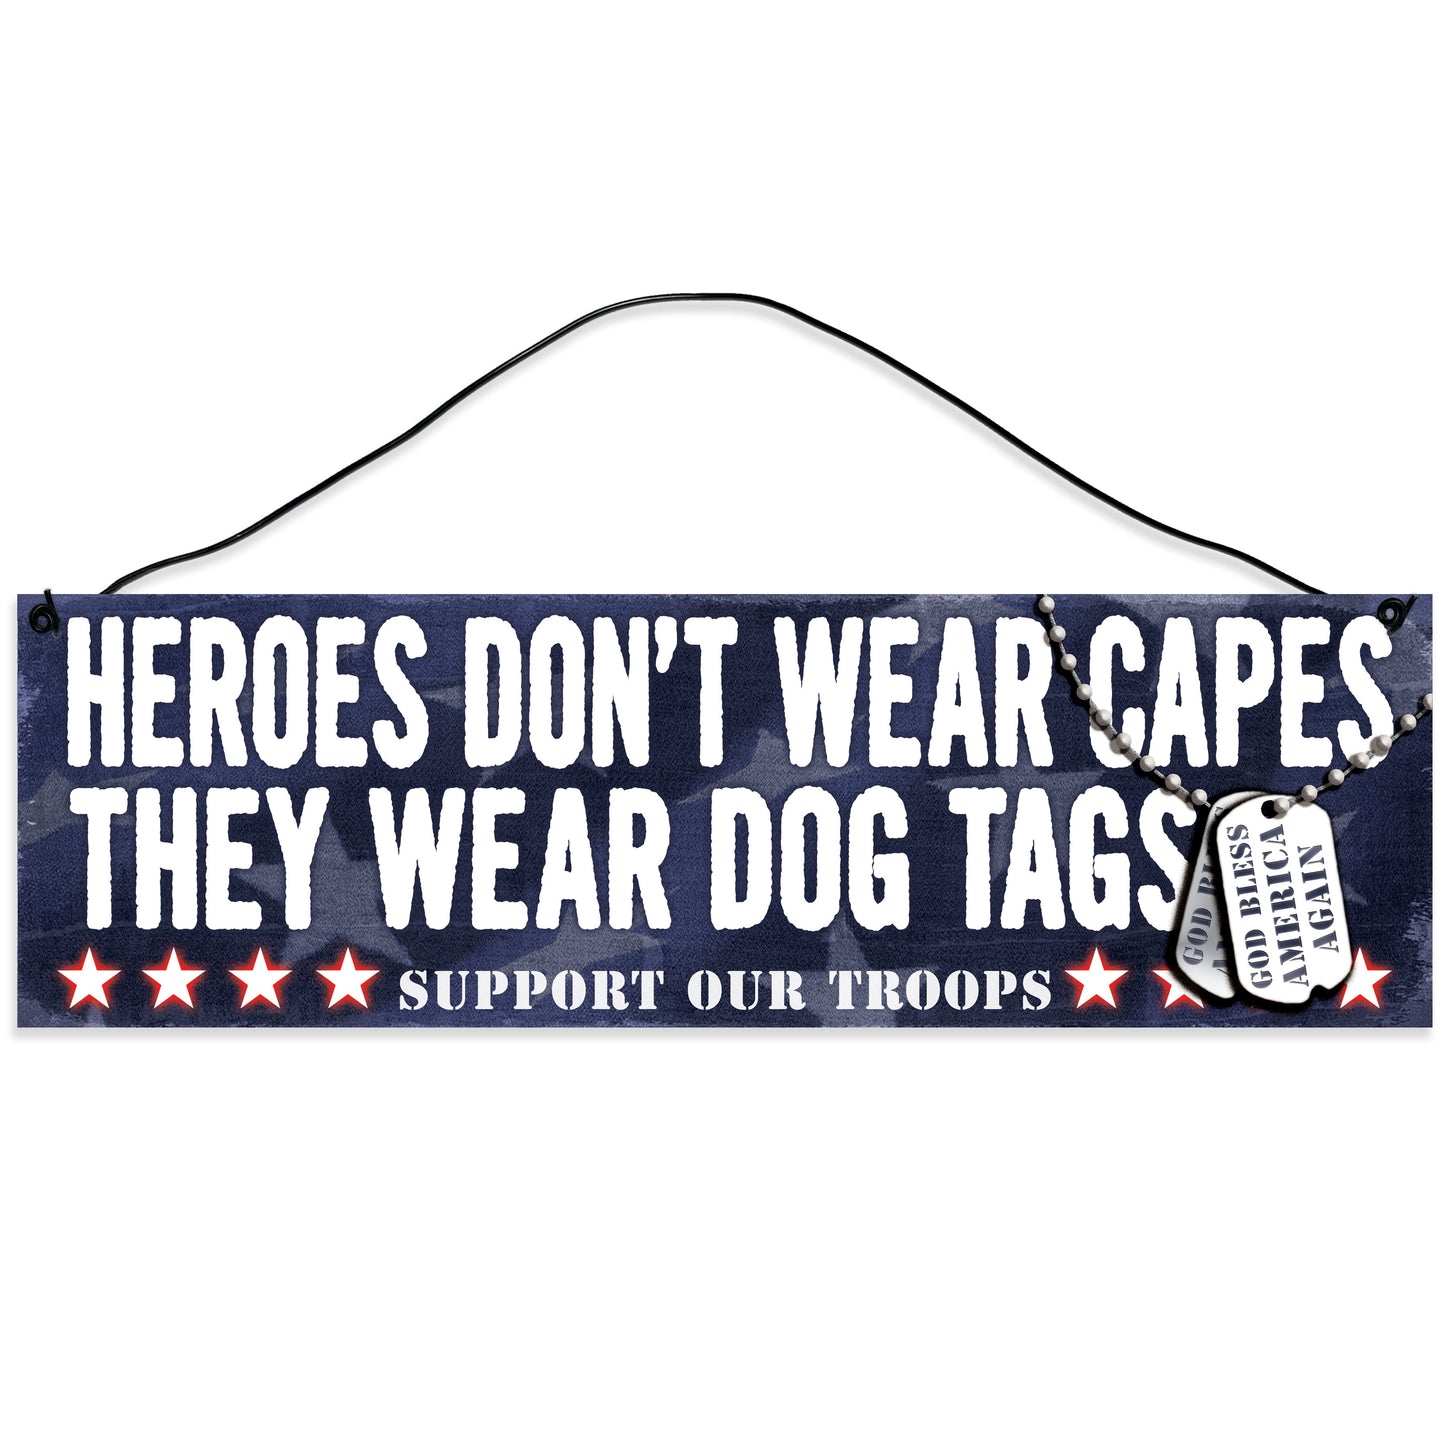 Sawyer's Mill - Heroes Don't Wear Capes. They Wear Dogtags. God Bless America Again. Wood Sign for Home or Office. Measures 3x10 inches.